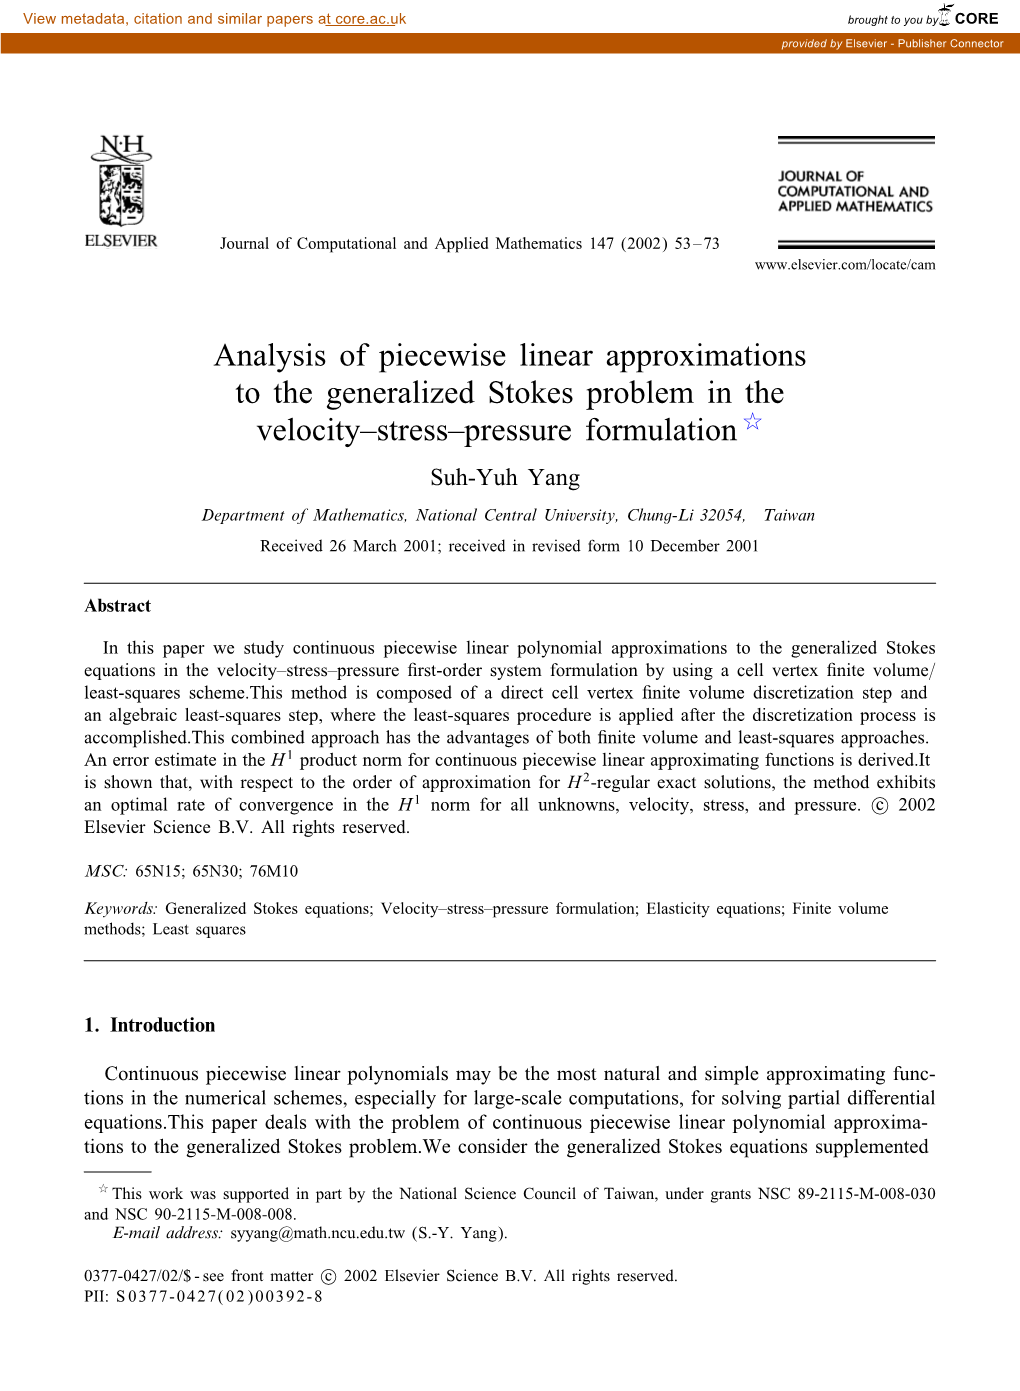 Analysis of Piecewise Linear Approximations to the Generalized Stokes Problem in the Velocity–Stress–Pressure Formulation  Suh-Yuh Yang